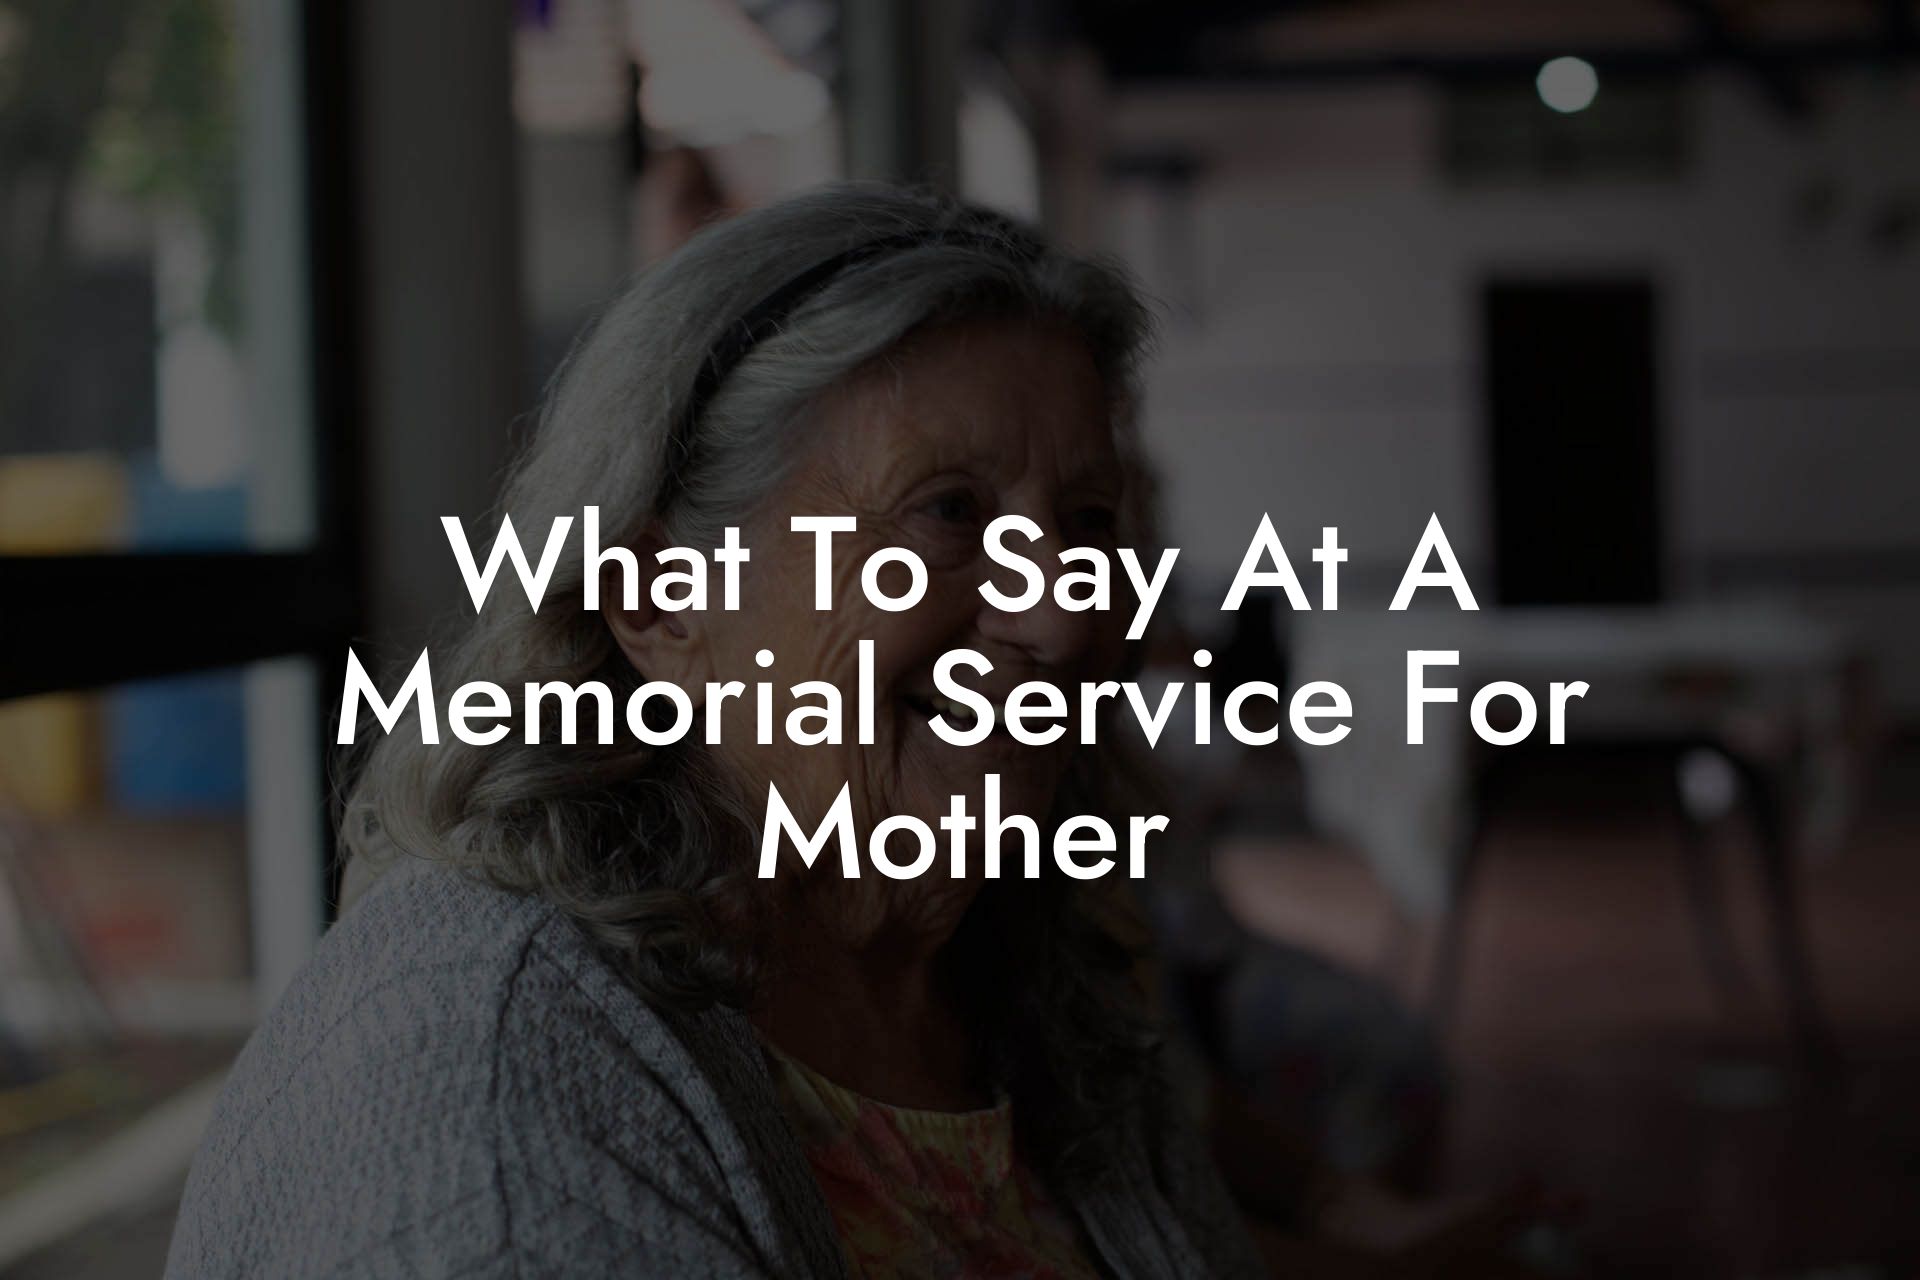 What To Say At A Memorial Service For Mother